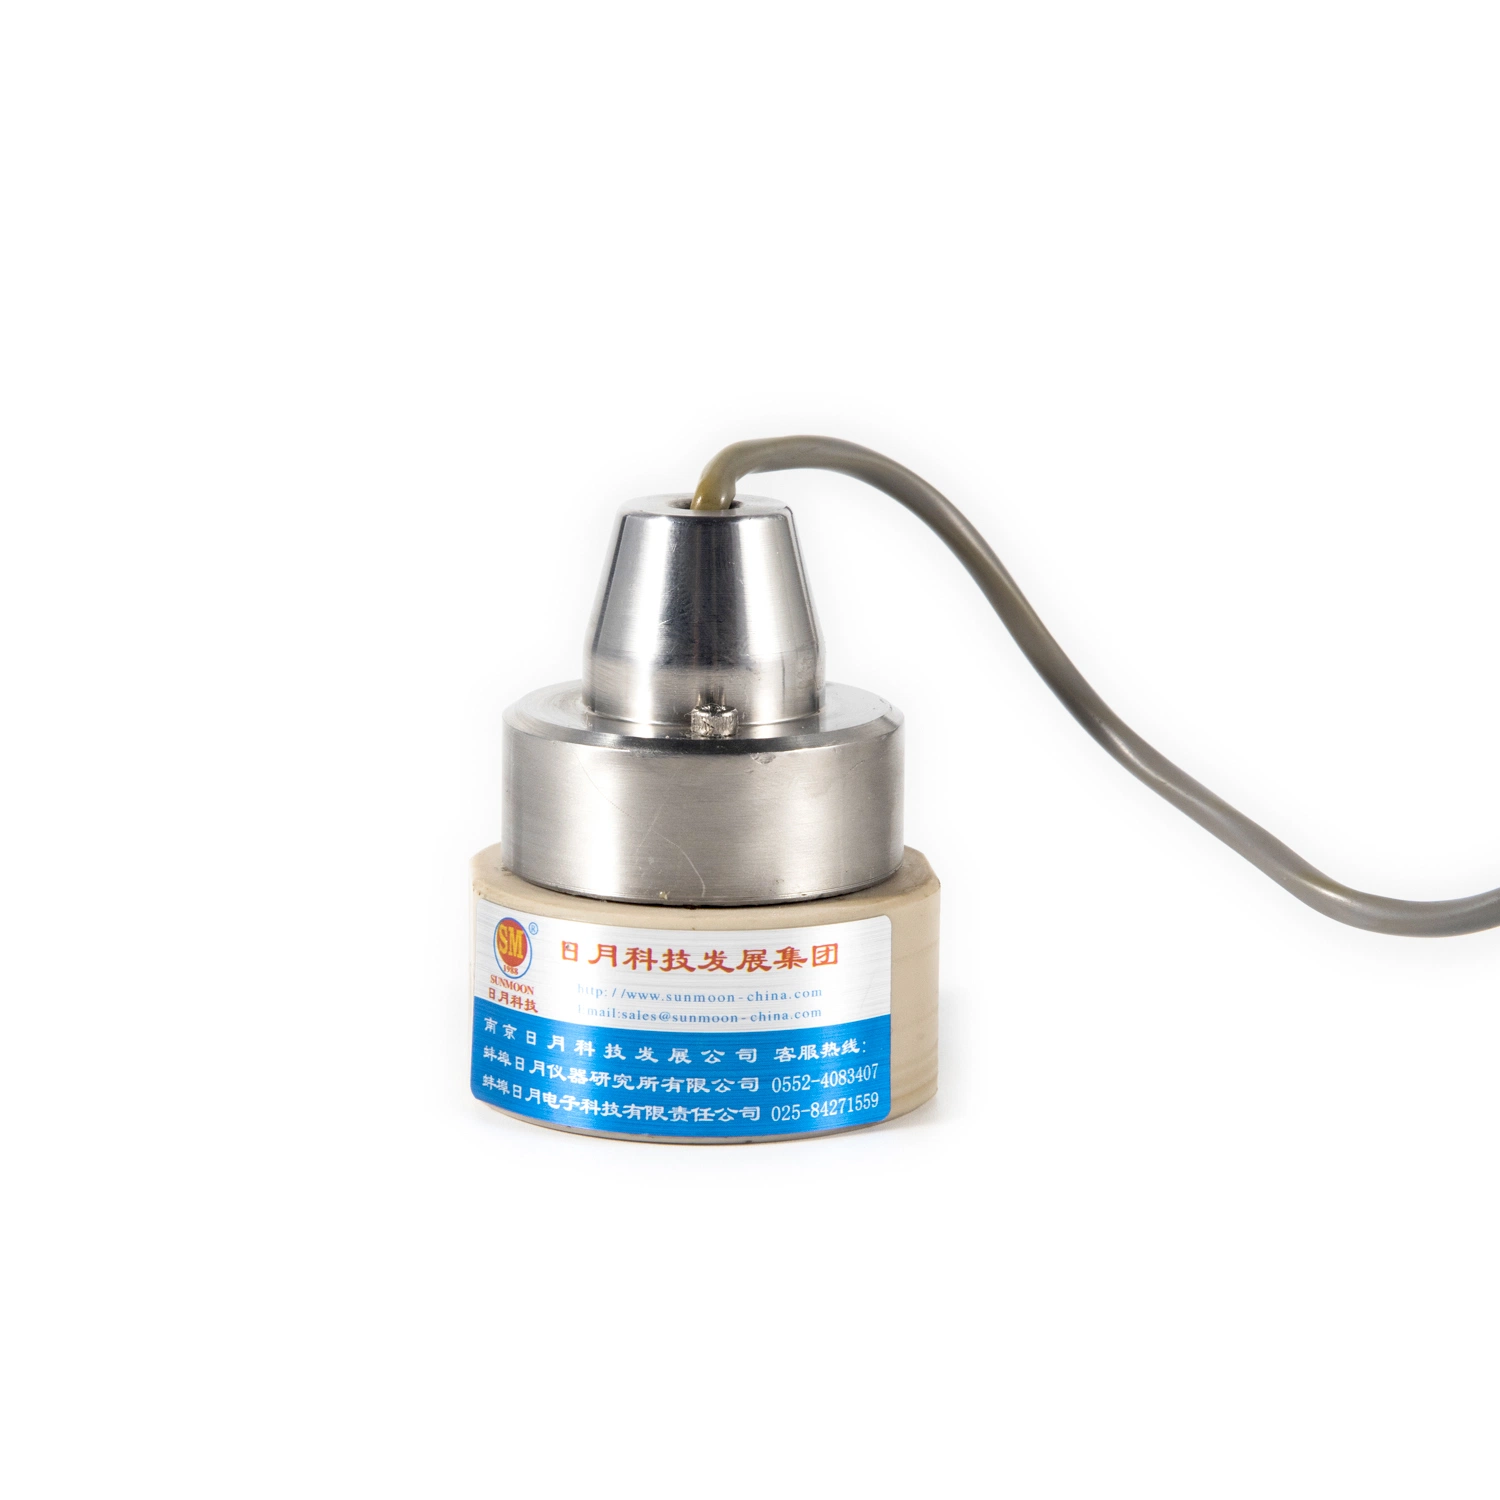 5ton Tension and Compression Load Cell Price Torque Sensor